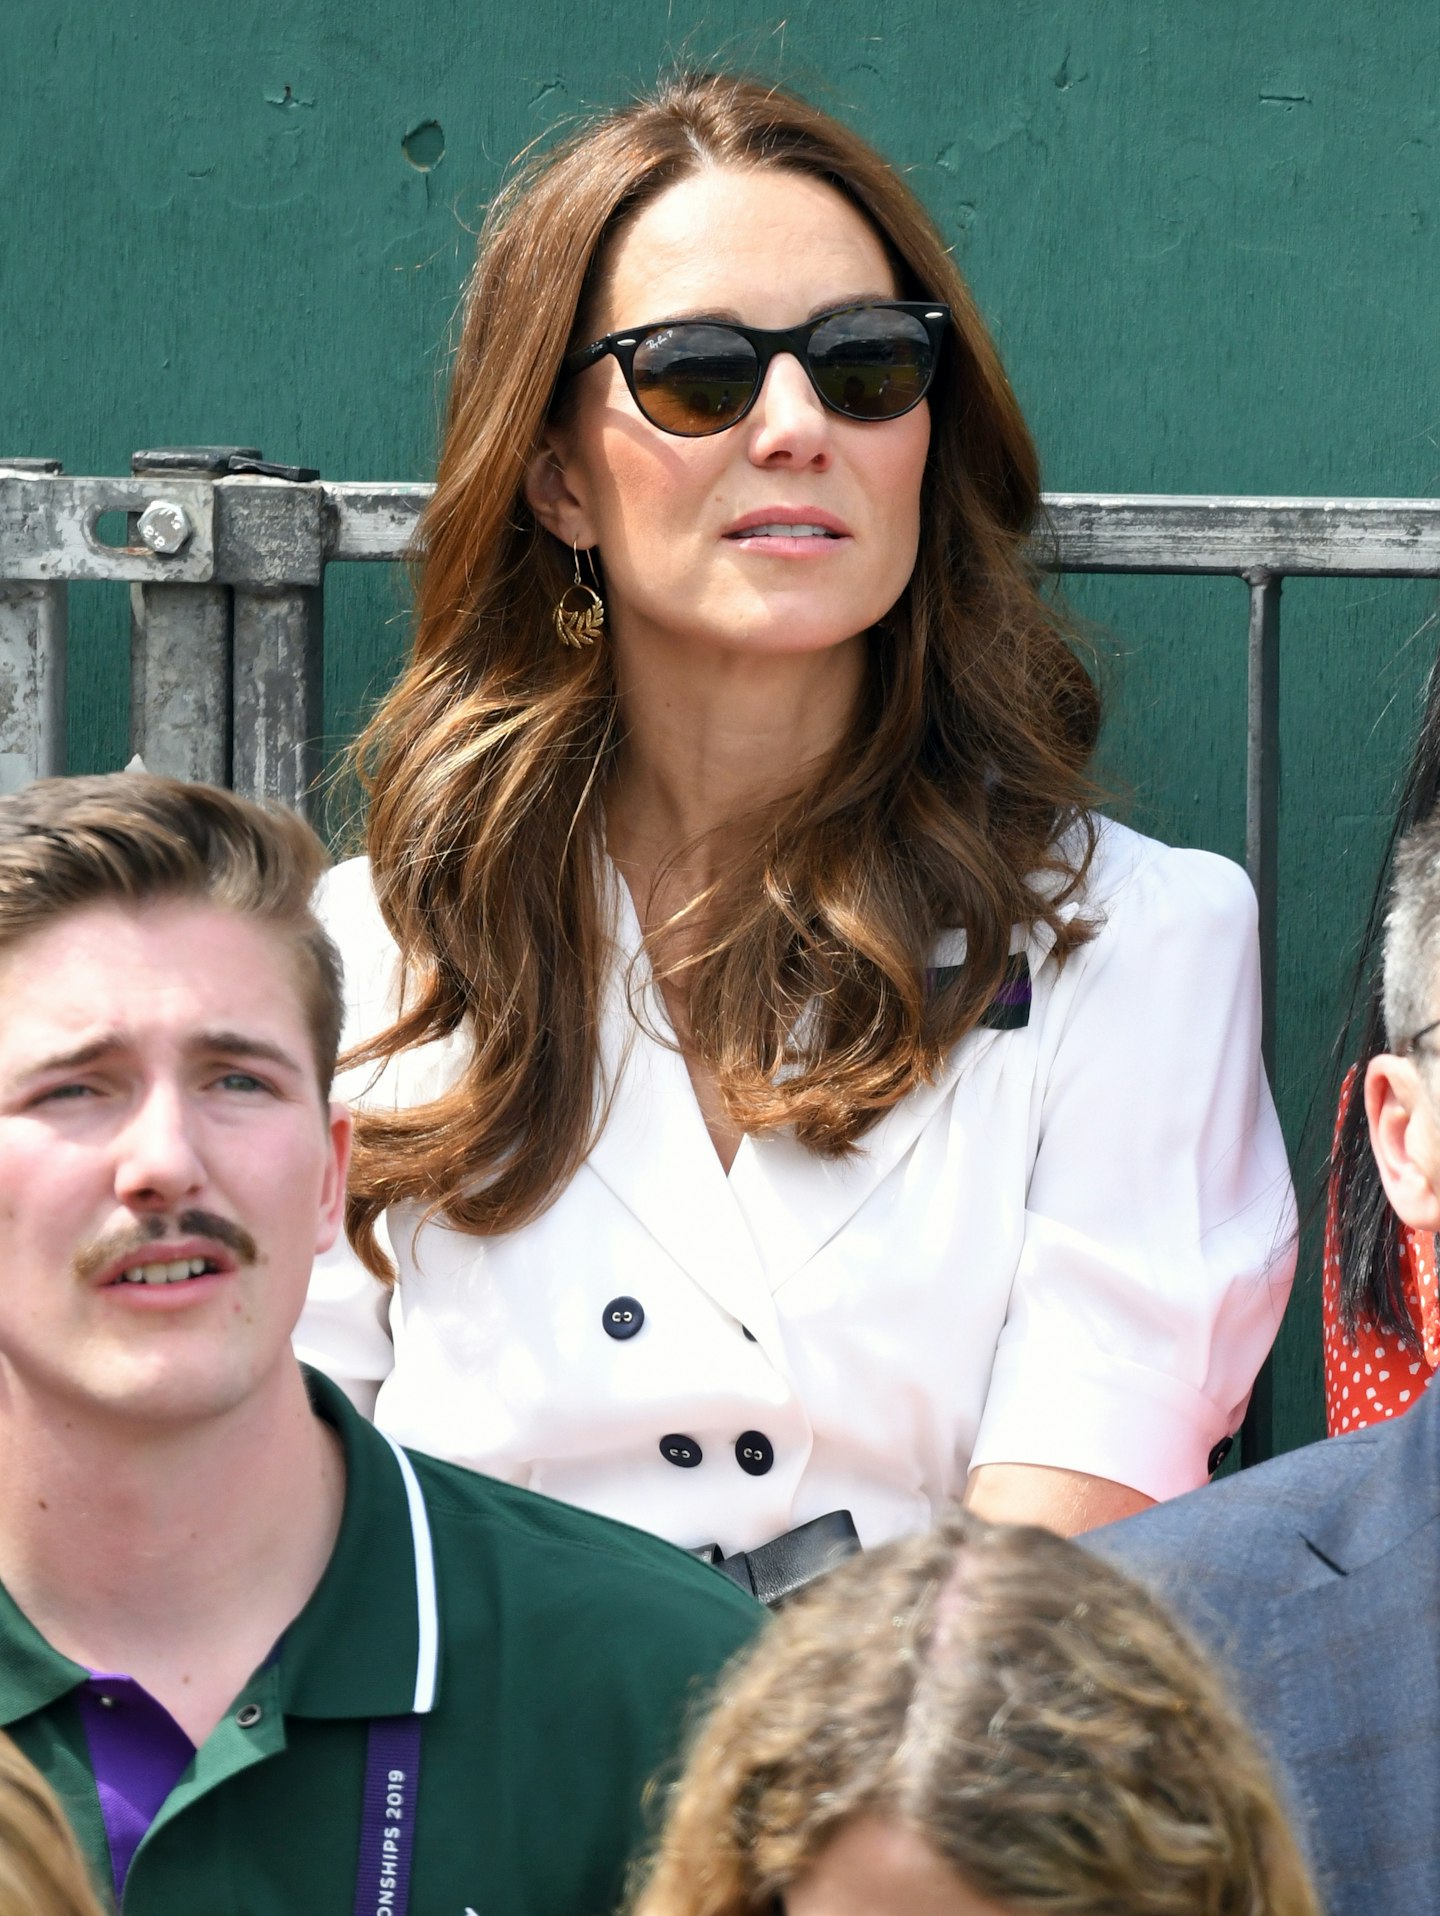 The Duchess of Cambridge at Wimbledon in Ray Ban sunglasses 